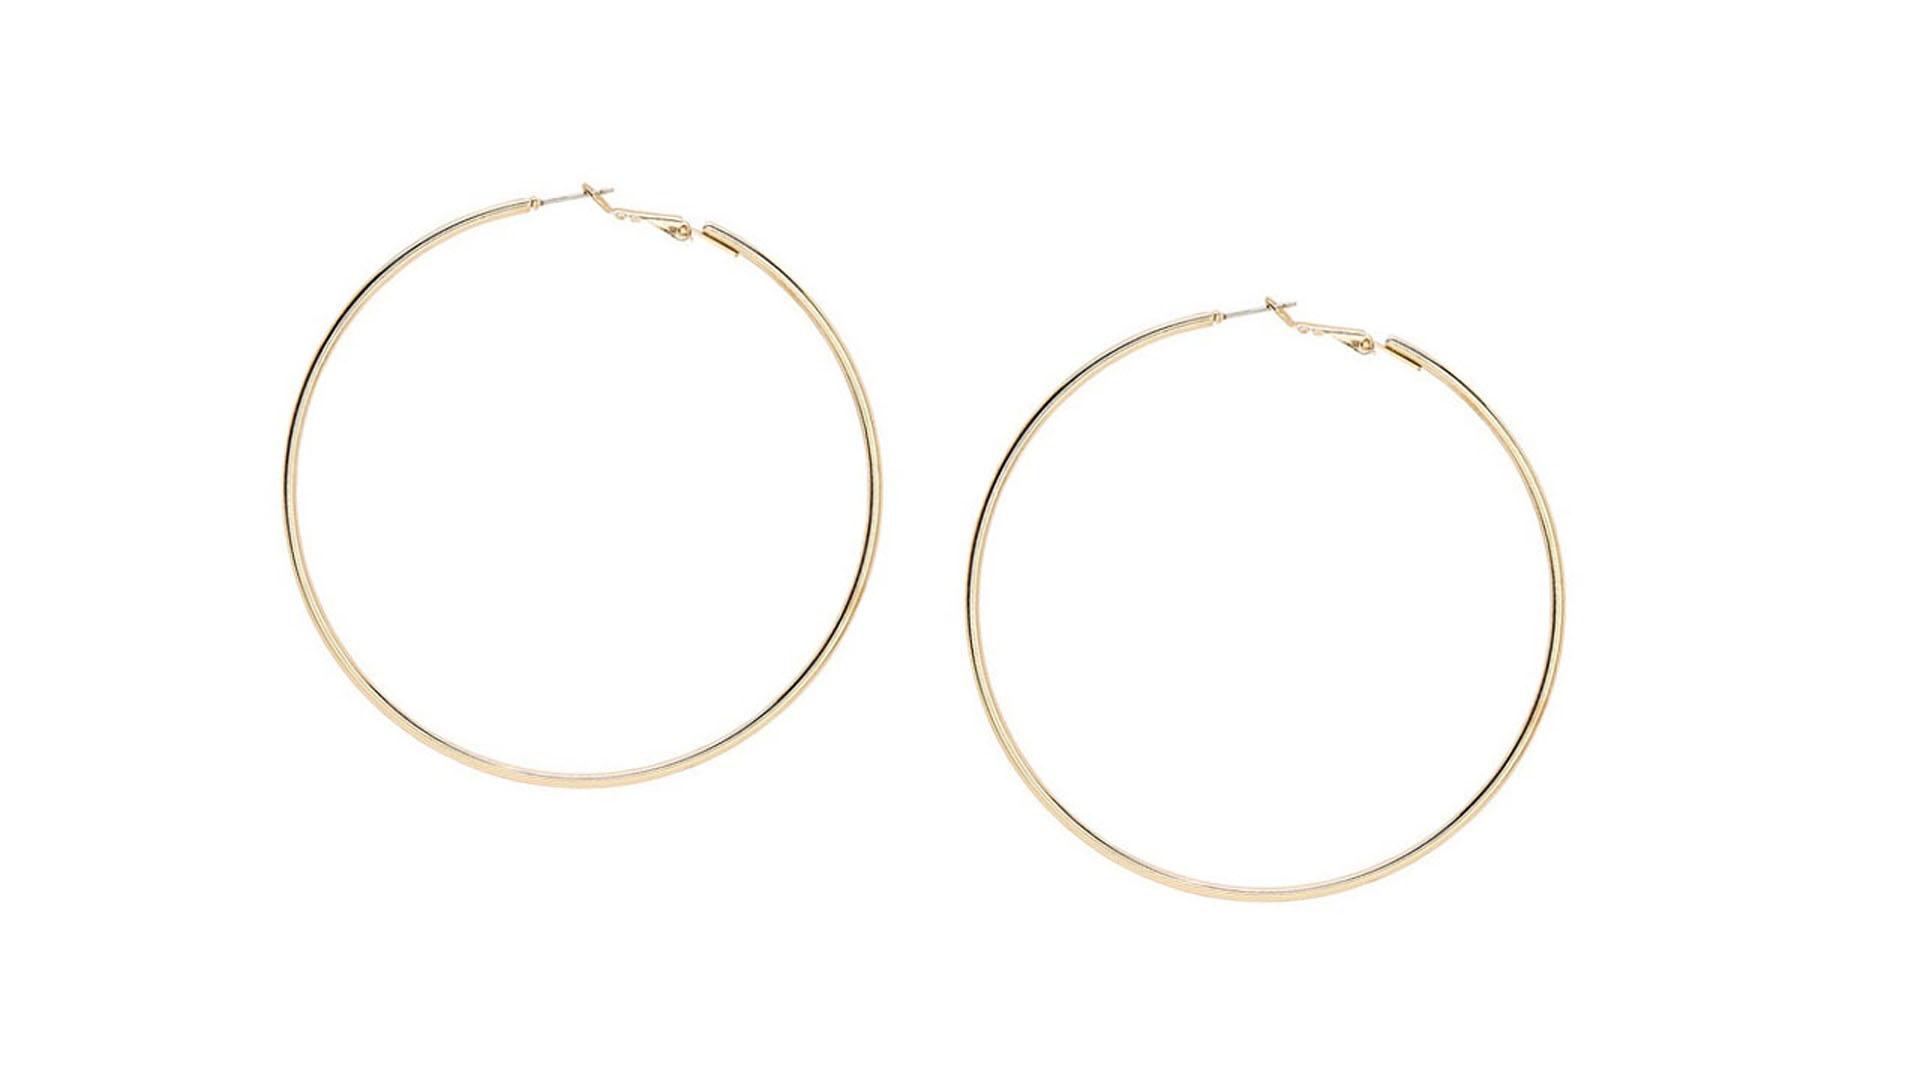 7 of the best giant hoop earrings for summer on any budget